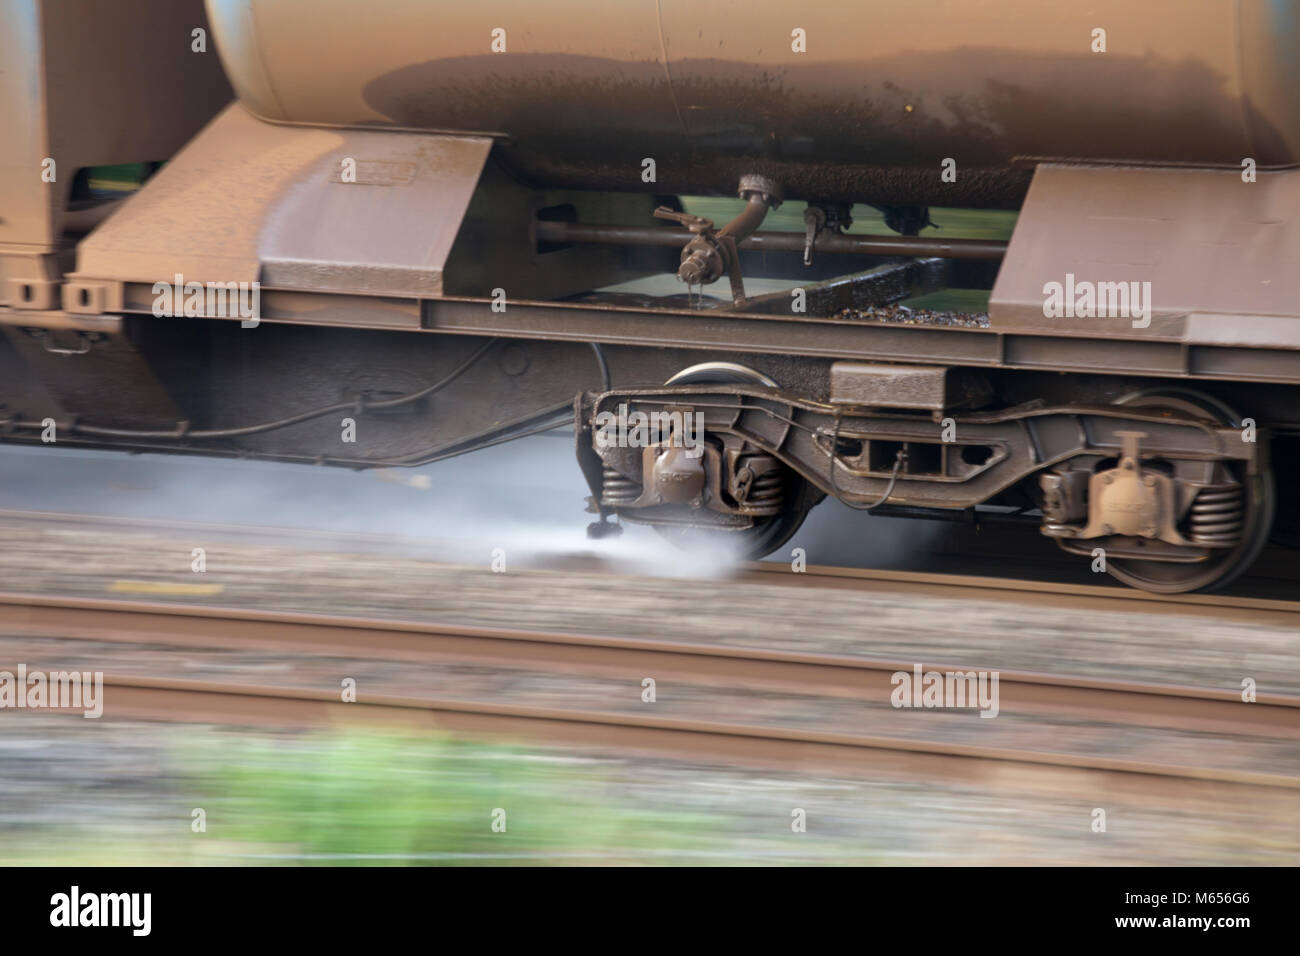 WATER JET SPRAYING FROM A NETWORK RAIL RAILHEAD TREATMENT TRAIN (WATER CANNON)  WASHING LEAF MULCH FROM THE SLIPPERY RAILHEAD IN AUTUMN Stock Photo